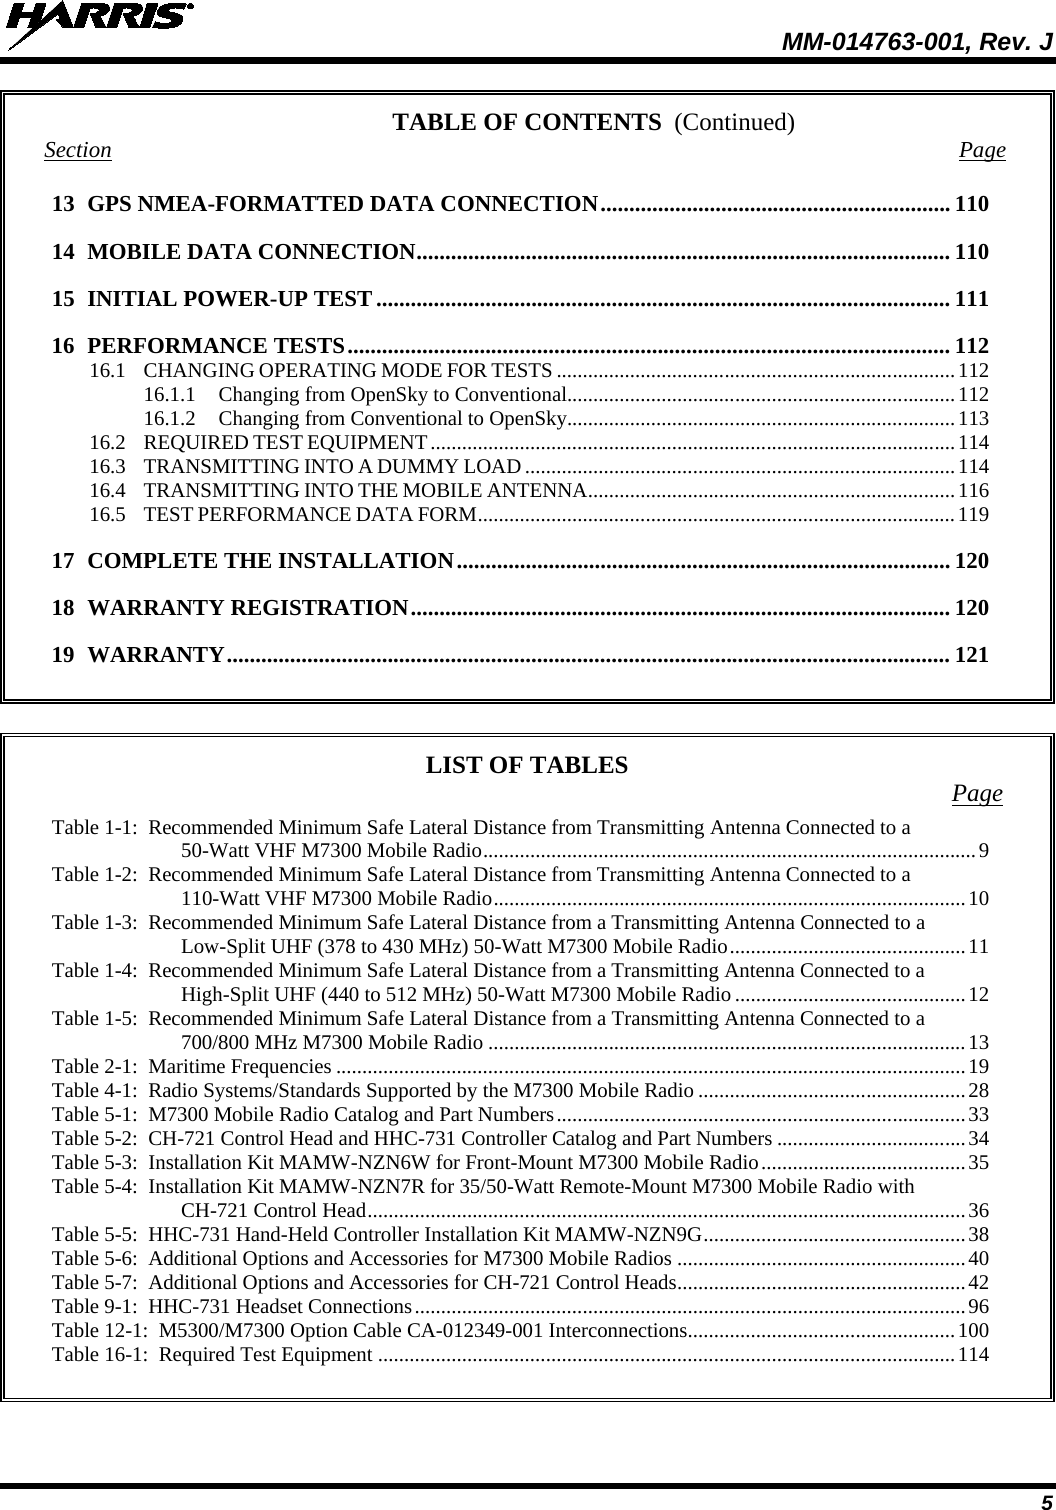  MM-014763-001, Rev. J 5 TABLE OF CONTENTS Section Page 13 GPS NMEA-FORMATTED DATA CONNECTION ............................................................. 110 14 MOBILE DATA CONNECTION ............................................................................................. 110 15 INITIAL POWER-UP TEST .................................................................................................... 111 16 PERFORMANCE TESTS ......................................................................................................... 112 16.1 CHANGING OPERATING MODE FOR TESTS ............................................................................ 112 16.1.1 Changing from OpenSky to Conventional.......................................................................... 112 16.1.2 Changing from Conventional to OpenSky.......................................................................... 113 16.2 REQUIRED TEST EQUIPMENT .................................................................................................... 114 16.3 TRANSMITTING INTO A DUMMY LOAD .................................................................................. 114 16.4 TRANSMITTING INTO THE MOBILE ANTENNA ...................................................................... 116 16.5 TEST PERFORMANCE DATA FORM ........................................................................................... 119 17 COMPLETE THE INSTALLATION ...................................................................................... 120 18 WARRANTY REGISTRATION .............................................................................................. 120 19 WARRANTY .............................................................................................................................. 121    LIST OF TABLES Page Table 1-1:  Recommended Minimum Safe Lateral Distance from Transmitting Antenna Connected to a 50-Watt VHF M7300 Mobile Radio .............................................................................................. 9 Table 1-2:  Recommended Minimum Safe Lateral Distance from Transmitting Antenna Connected to a 110-Watt VHF M7300 Mobile Radio .......................................................................................... 10 Table 1-3:  Recommended Minimum Safe Lateral Distance from a Transmitting Antenna Connected to a Low-Split UHF (378 to 430 MHz) 50-Watt M7300 Mobile Radio ............................................. 11 Table 1-4:  Recommended Minimum Safe Lateral Distance from a Transmitting Antenna Connected to a High-Split UHF (440 to 512 MHz) 50-Watt M7300 Mobile Radio ............................................ 12 Table 1-5:  Recommended Minimum Safe Lateral Distance from a Transmitting Antenna Connected to a 700/800 MHz M7300 Mobile Radio ........................................................................................... 13 Table 2-1:  Maritime Frequencies ........................................................................................................................ 19 Table 4-1:  Radio Systems/Standards Supported by the M7300 Mobile Radio ................................................... 28 Table 5-1:  M7300 Mobile Radio Catalog and Part Numbers .............................................................................. 33 Table 5-2:  CH-721 Control Head and HHC-731 Controller Catalog and Part Numbers .................................... 34 Table 5-3:  Installation Kit MAMW-NZN6W for Front-Mount M7300 Mobile Radio ....................................... 35 Table 5-4:  Installation Kit MAMW-NZN7R for 35/50-Watt Remote-Mount M7300 Mobile Radio with CH-721 Control Head .................................................................................................................. 36 Table 5-5:  HHC-731 Hand-Held Controller Installation Kit MAMW-NZN9G .................................................. 38 Table 5-6:  Additional Options and Accessories for M7300 Mobile Radios ....................................................... 40 Table 5-7:  Additional Options and Accessories for CH-721 Control Heads ....................................................... 42 Table 9-1:  HHC-731 Headset Connections ......................................................................................................... 96 Table 12-1:  M5300/M7300 Option Cable CA-012349-001 Interconnections ................................................... 100 Table 16-1:  Required Test Equipment .............................................................................................................. 114   (Continued) 